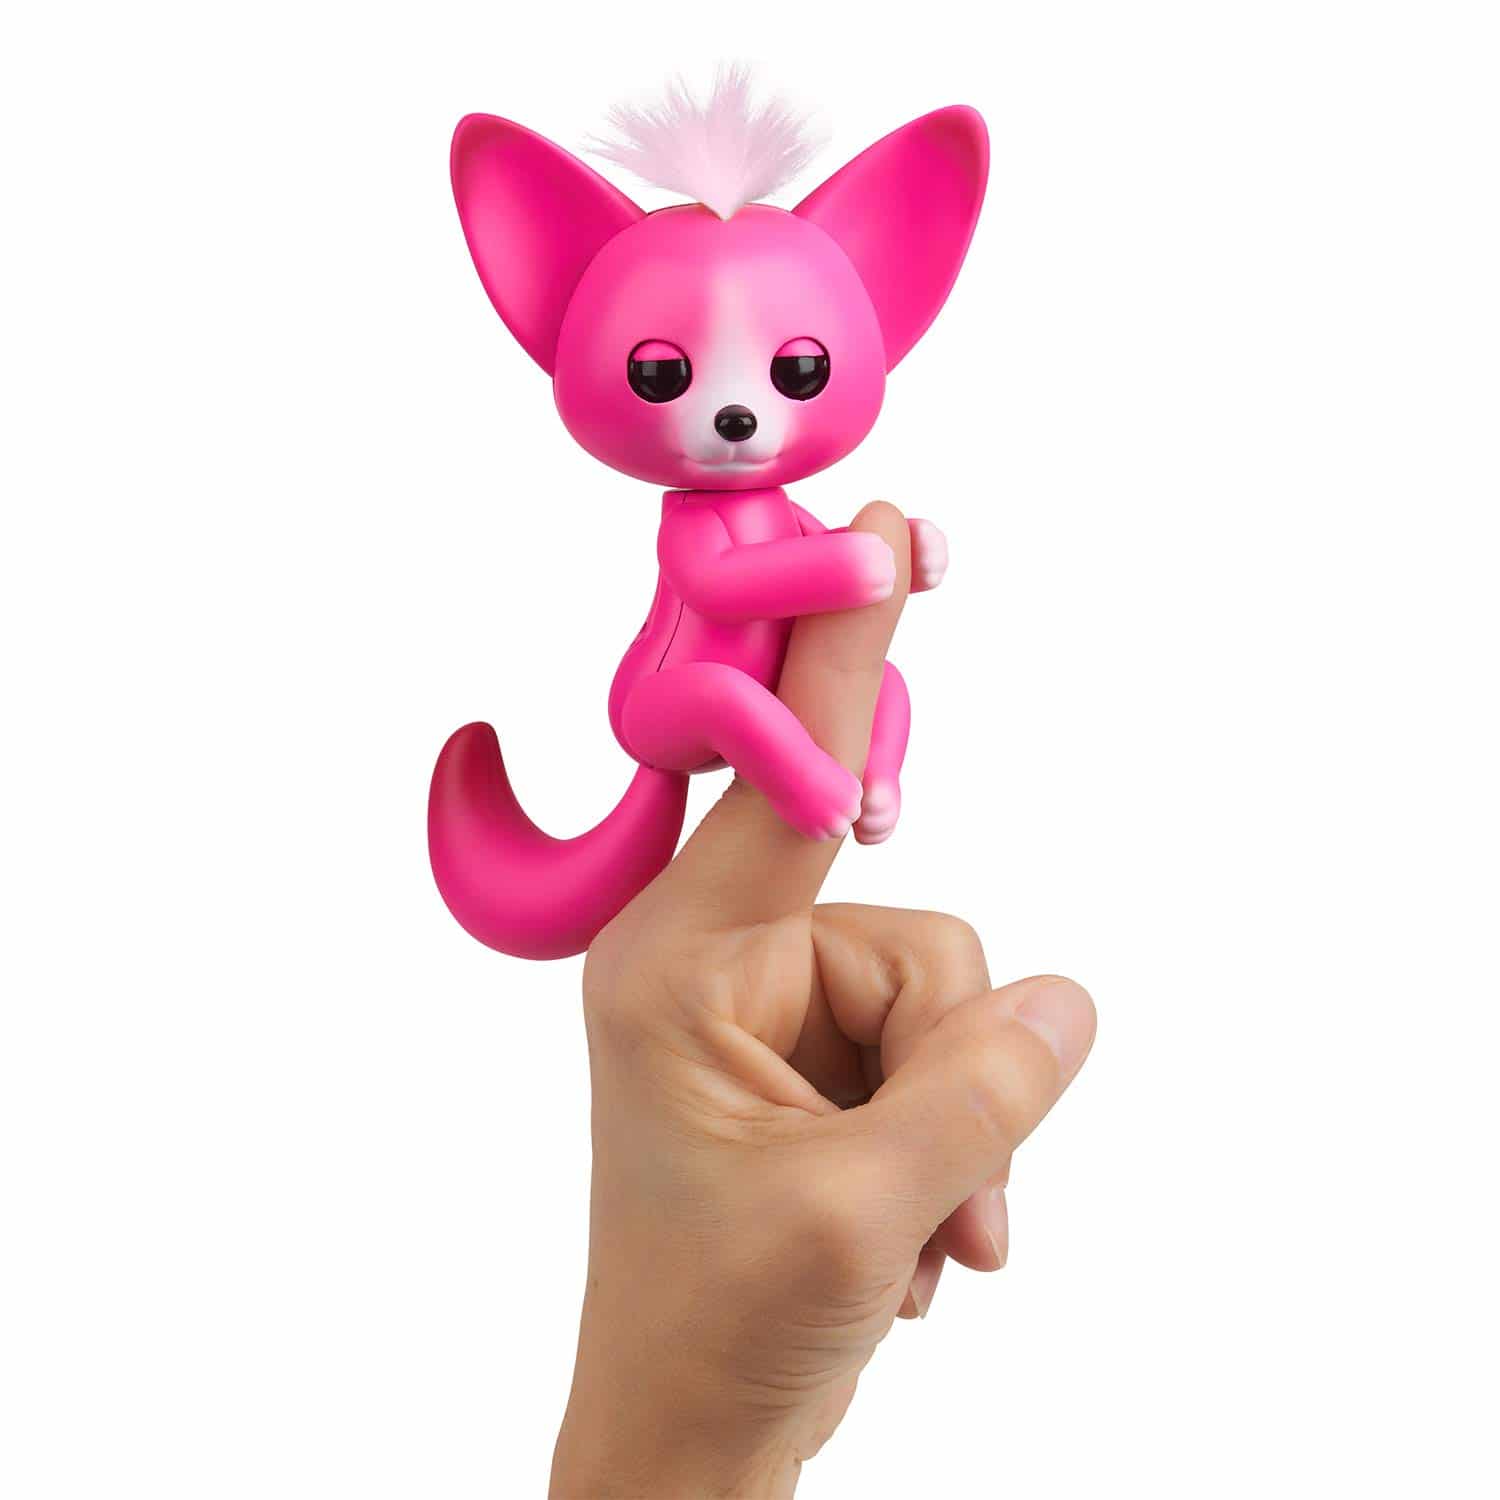 Kayla the Pink Fingerlings Fox 2022 - Where to Buy